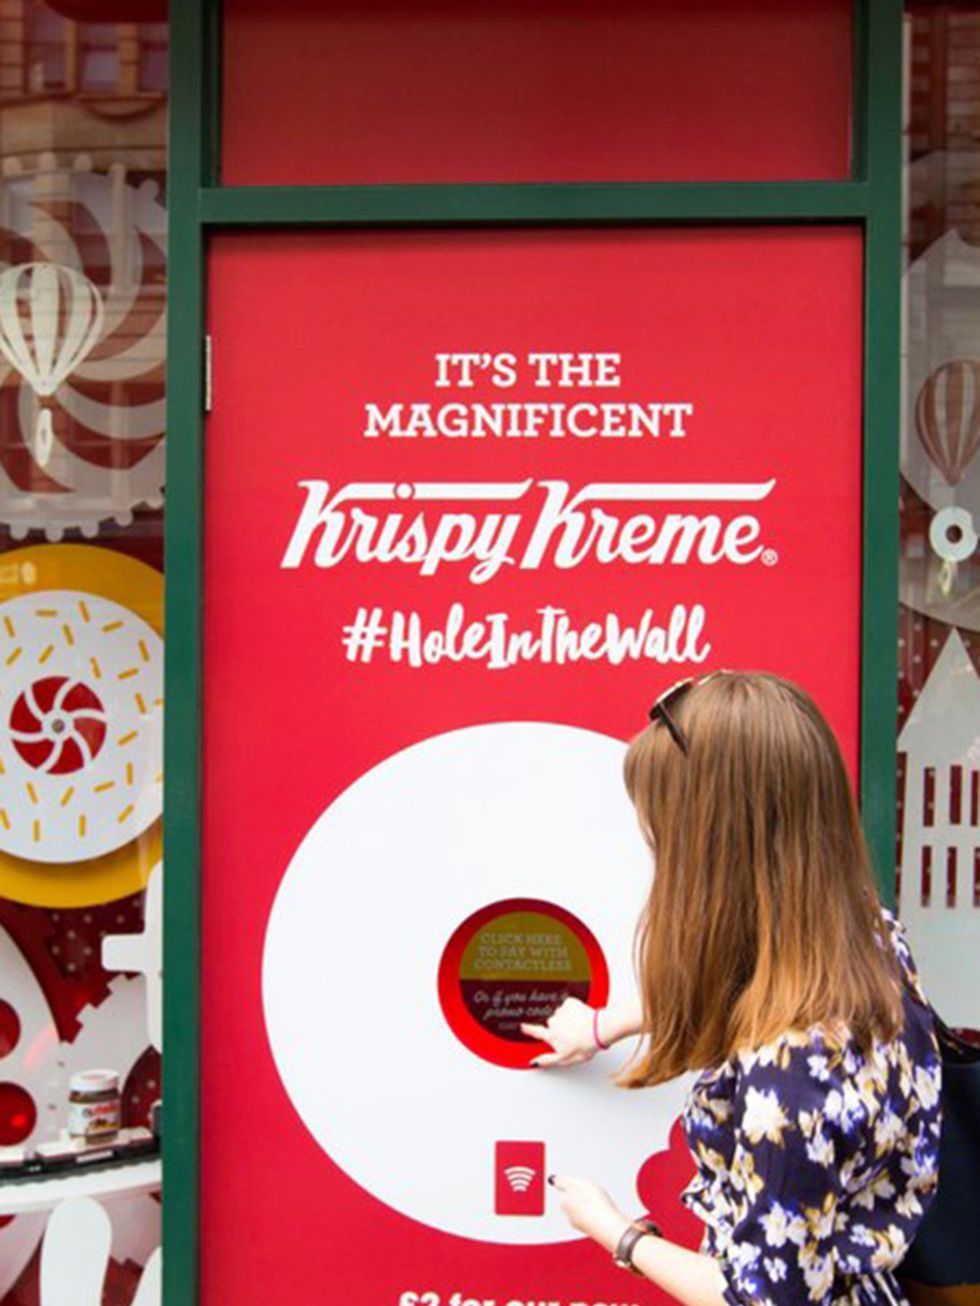 <p>FOOD: Krispy Kreme ATM</p>

<p>An ATM. D<span style="line-height:1.6">ispensing Krisy Kremes. Don&rsquo;t worry: it blew our minds too. We&rsquo;ll give you a moment for the idea to settle in&hellip; Back with us? Good. Then know that not only does suc